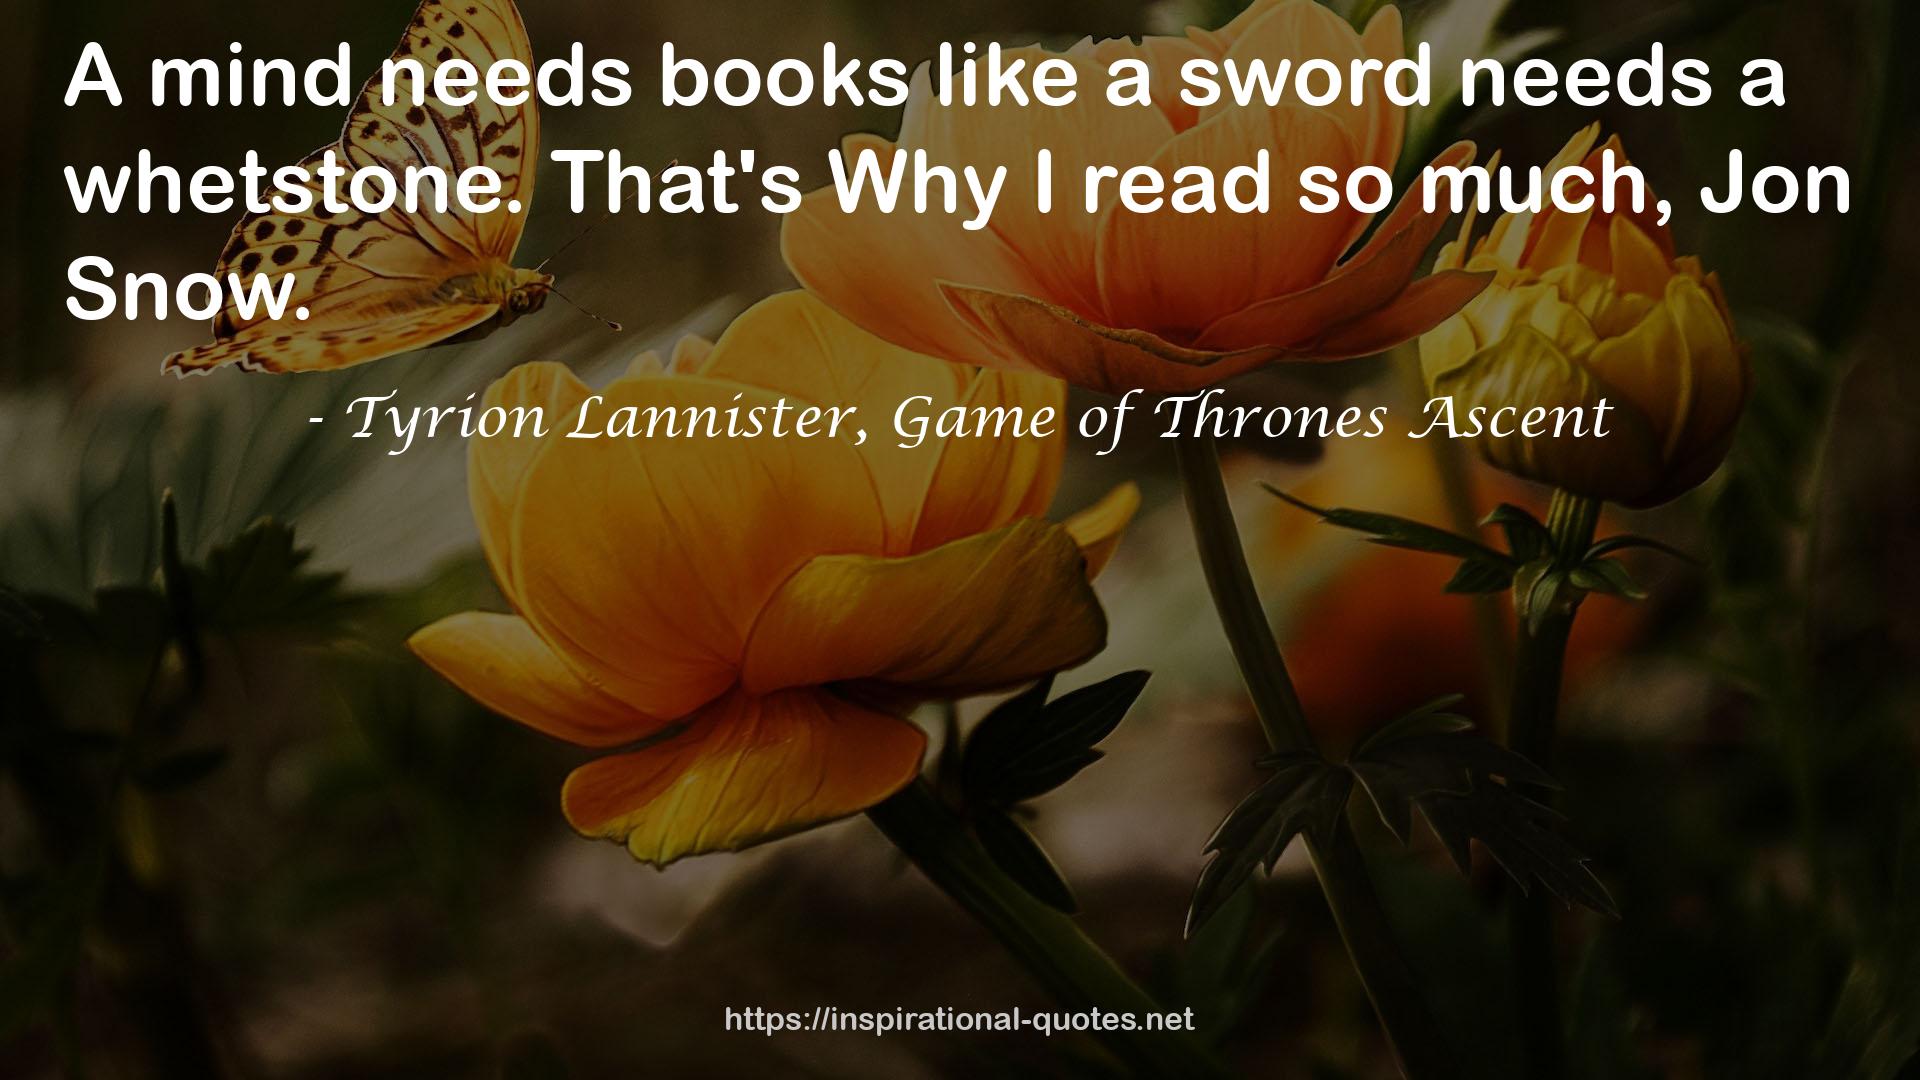 Tyrion Lannister, Game of Thrones Ascent QUOTES